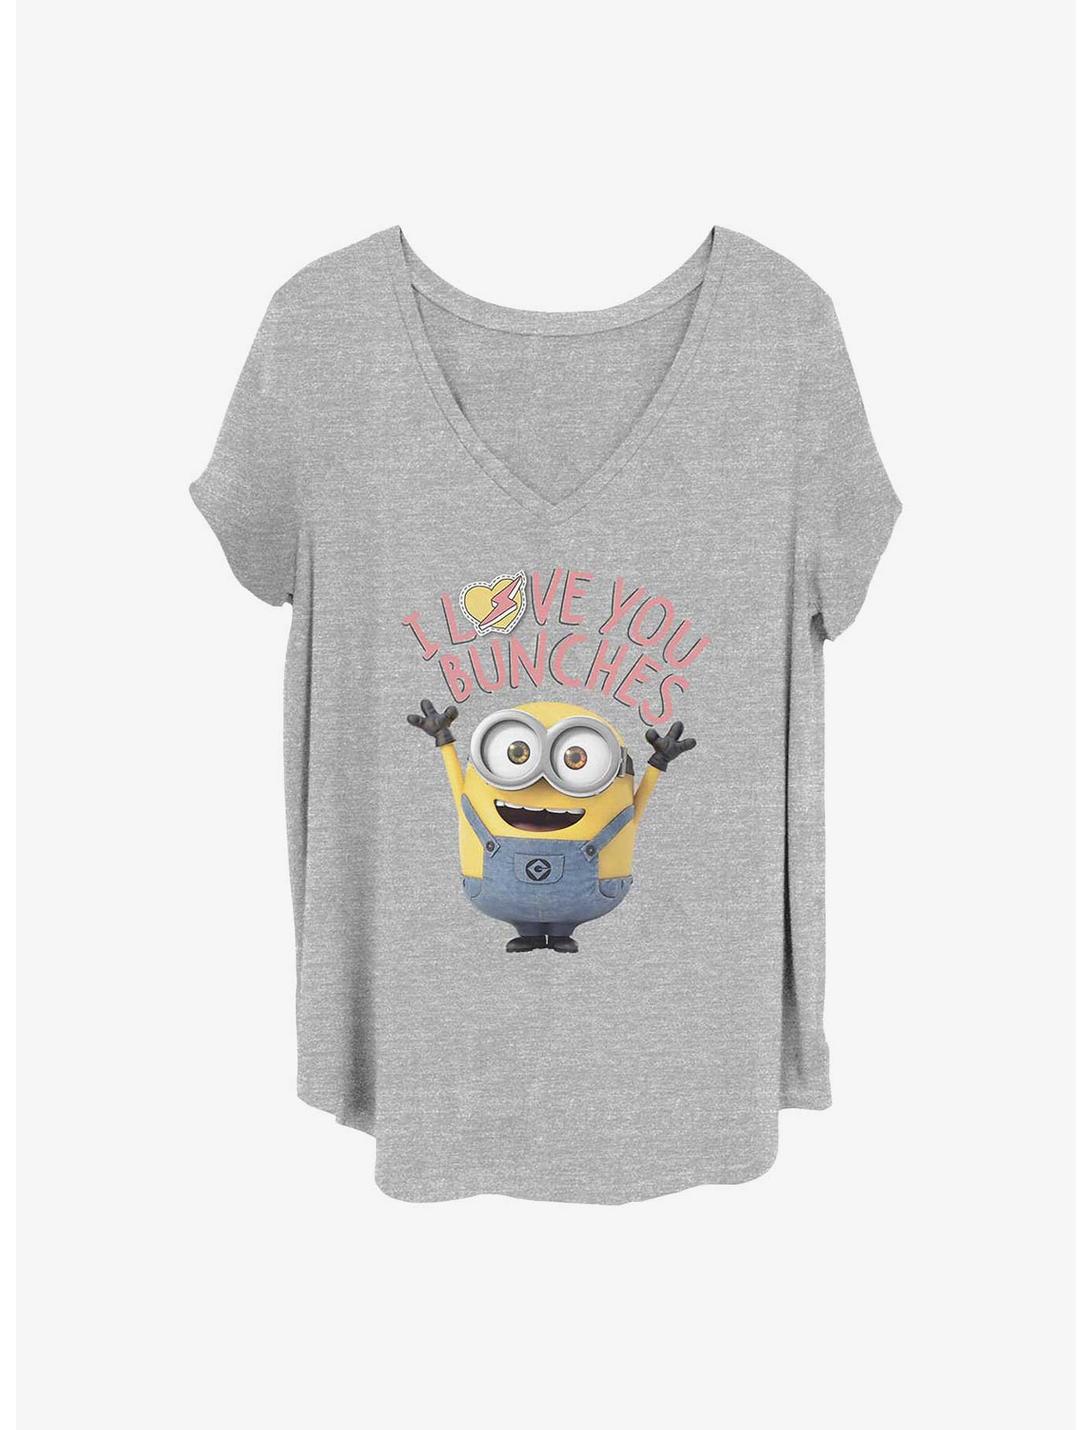 Minions Love You Bunches Girls T-Shirt Plus Size, HEATHER GR, hi-res